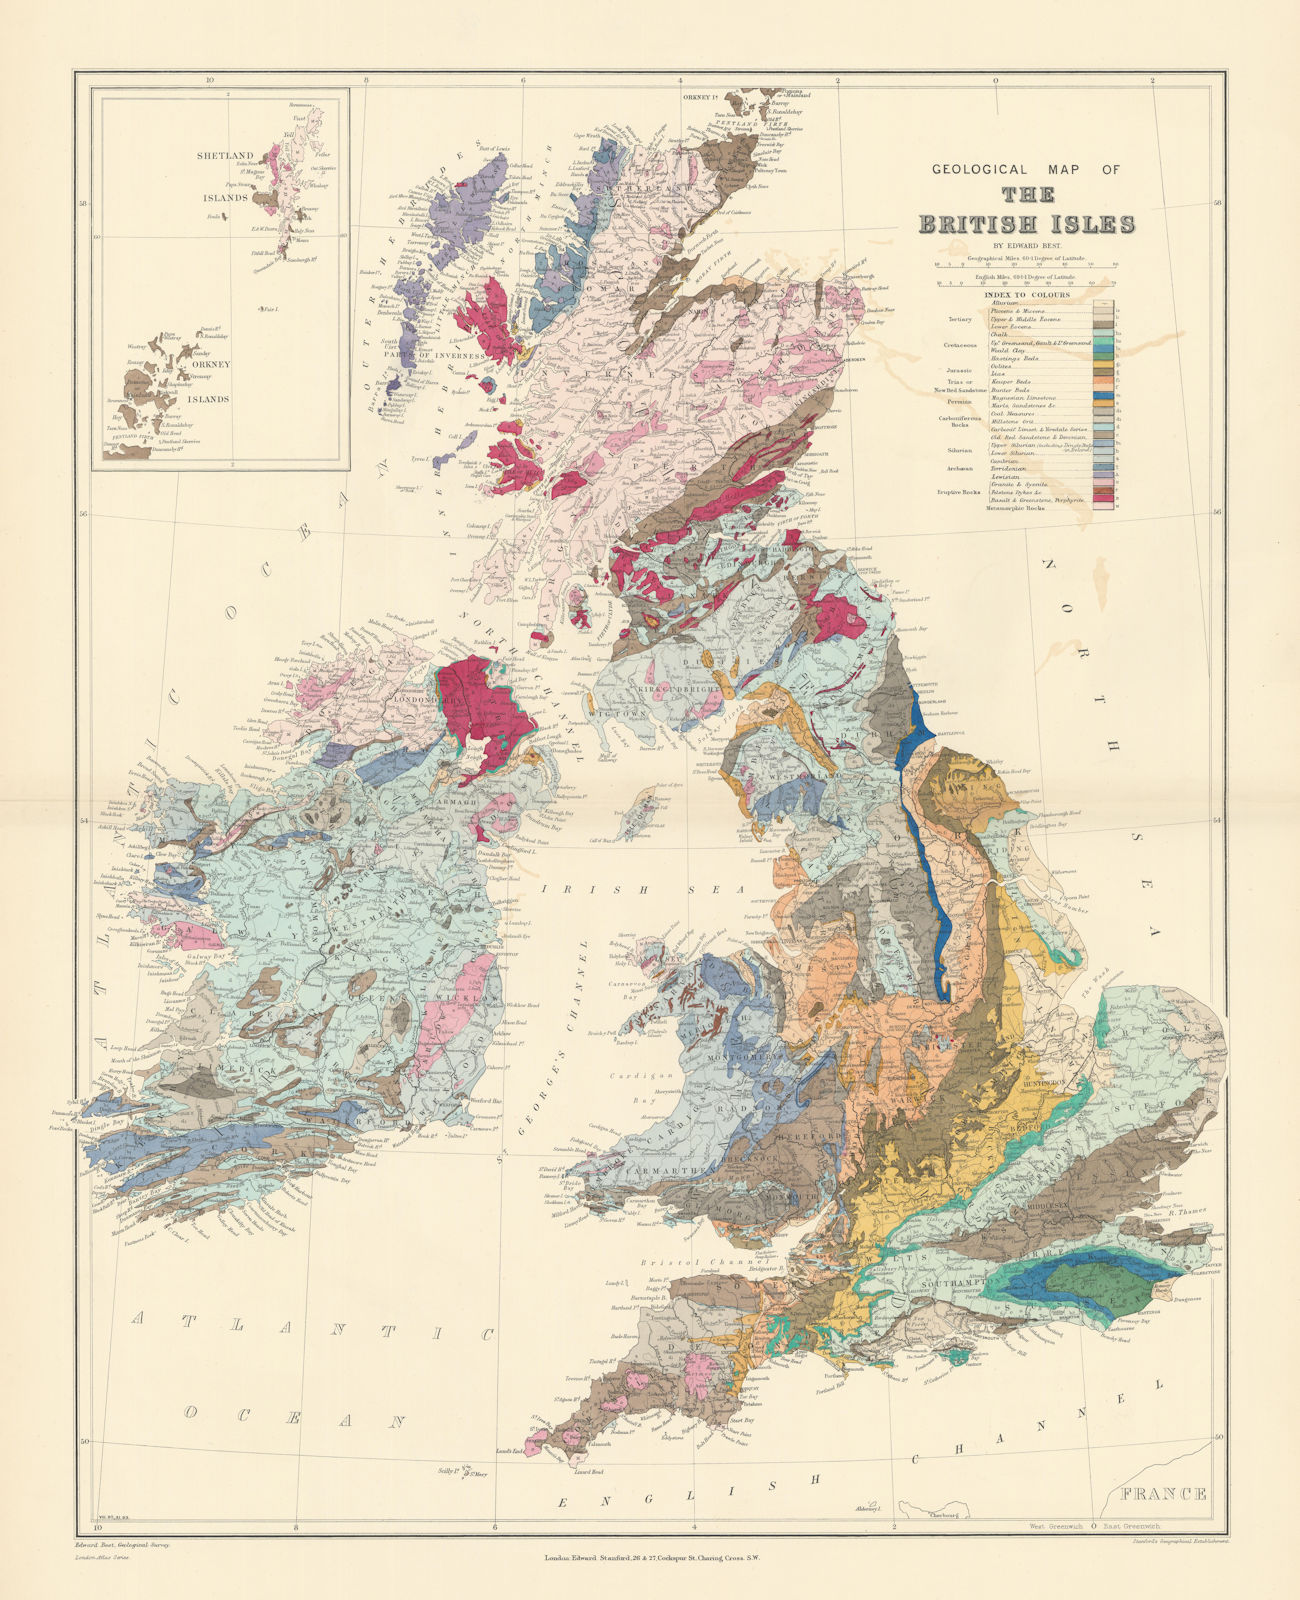 Geological Map of the British Isles. Large 66x53cm. STANFORD 1896 old